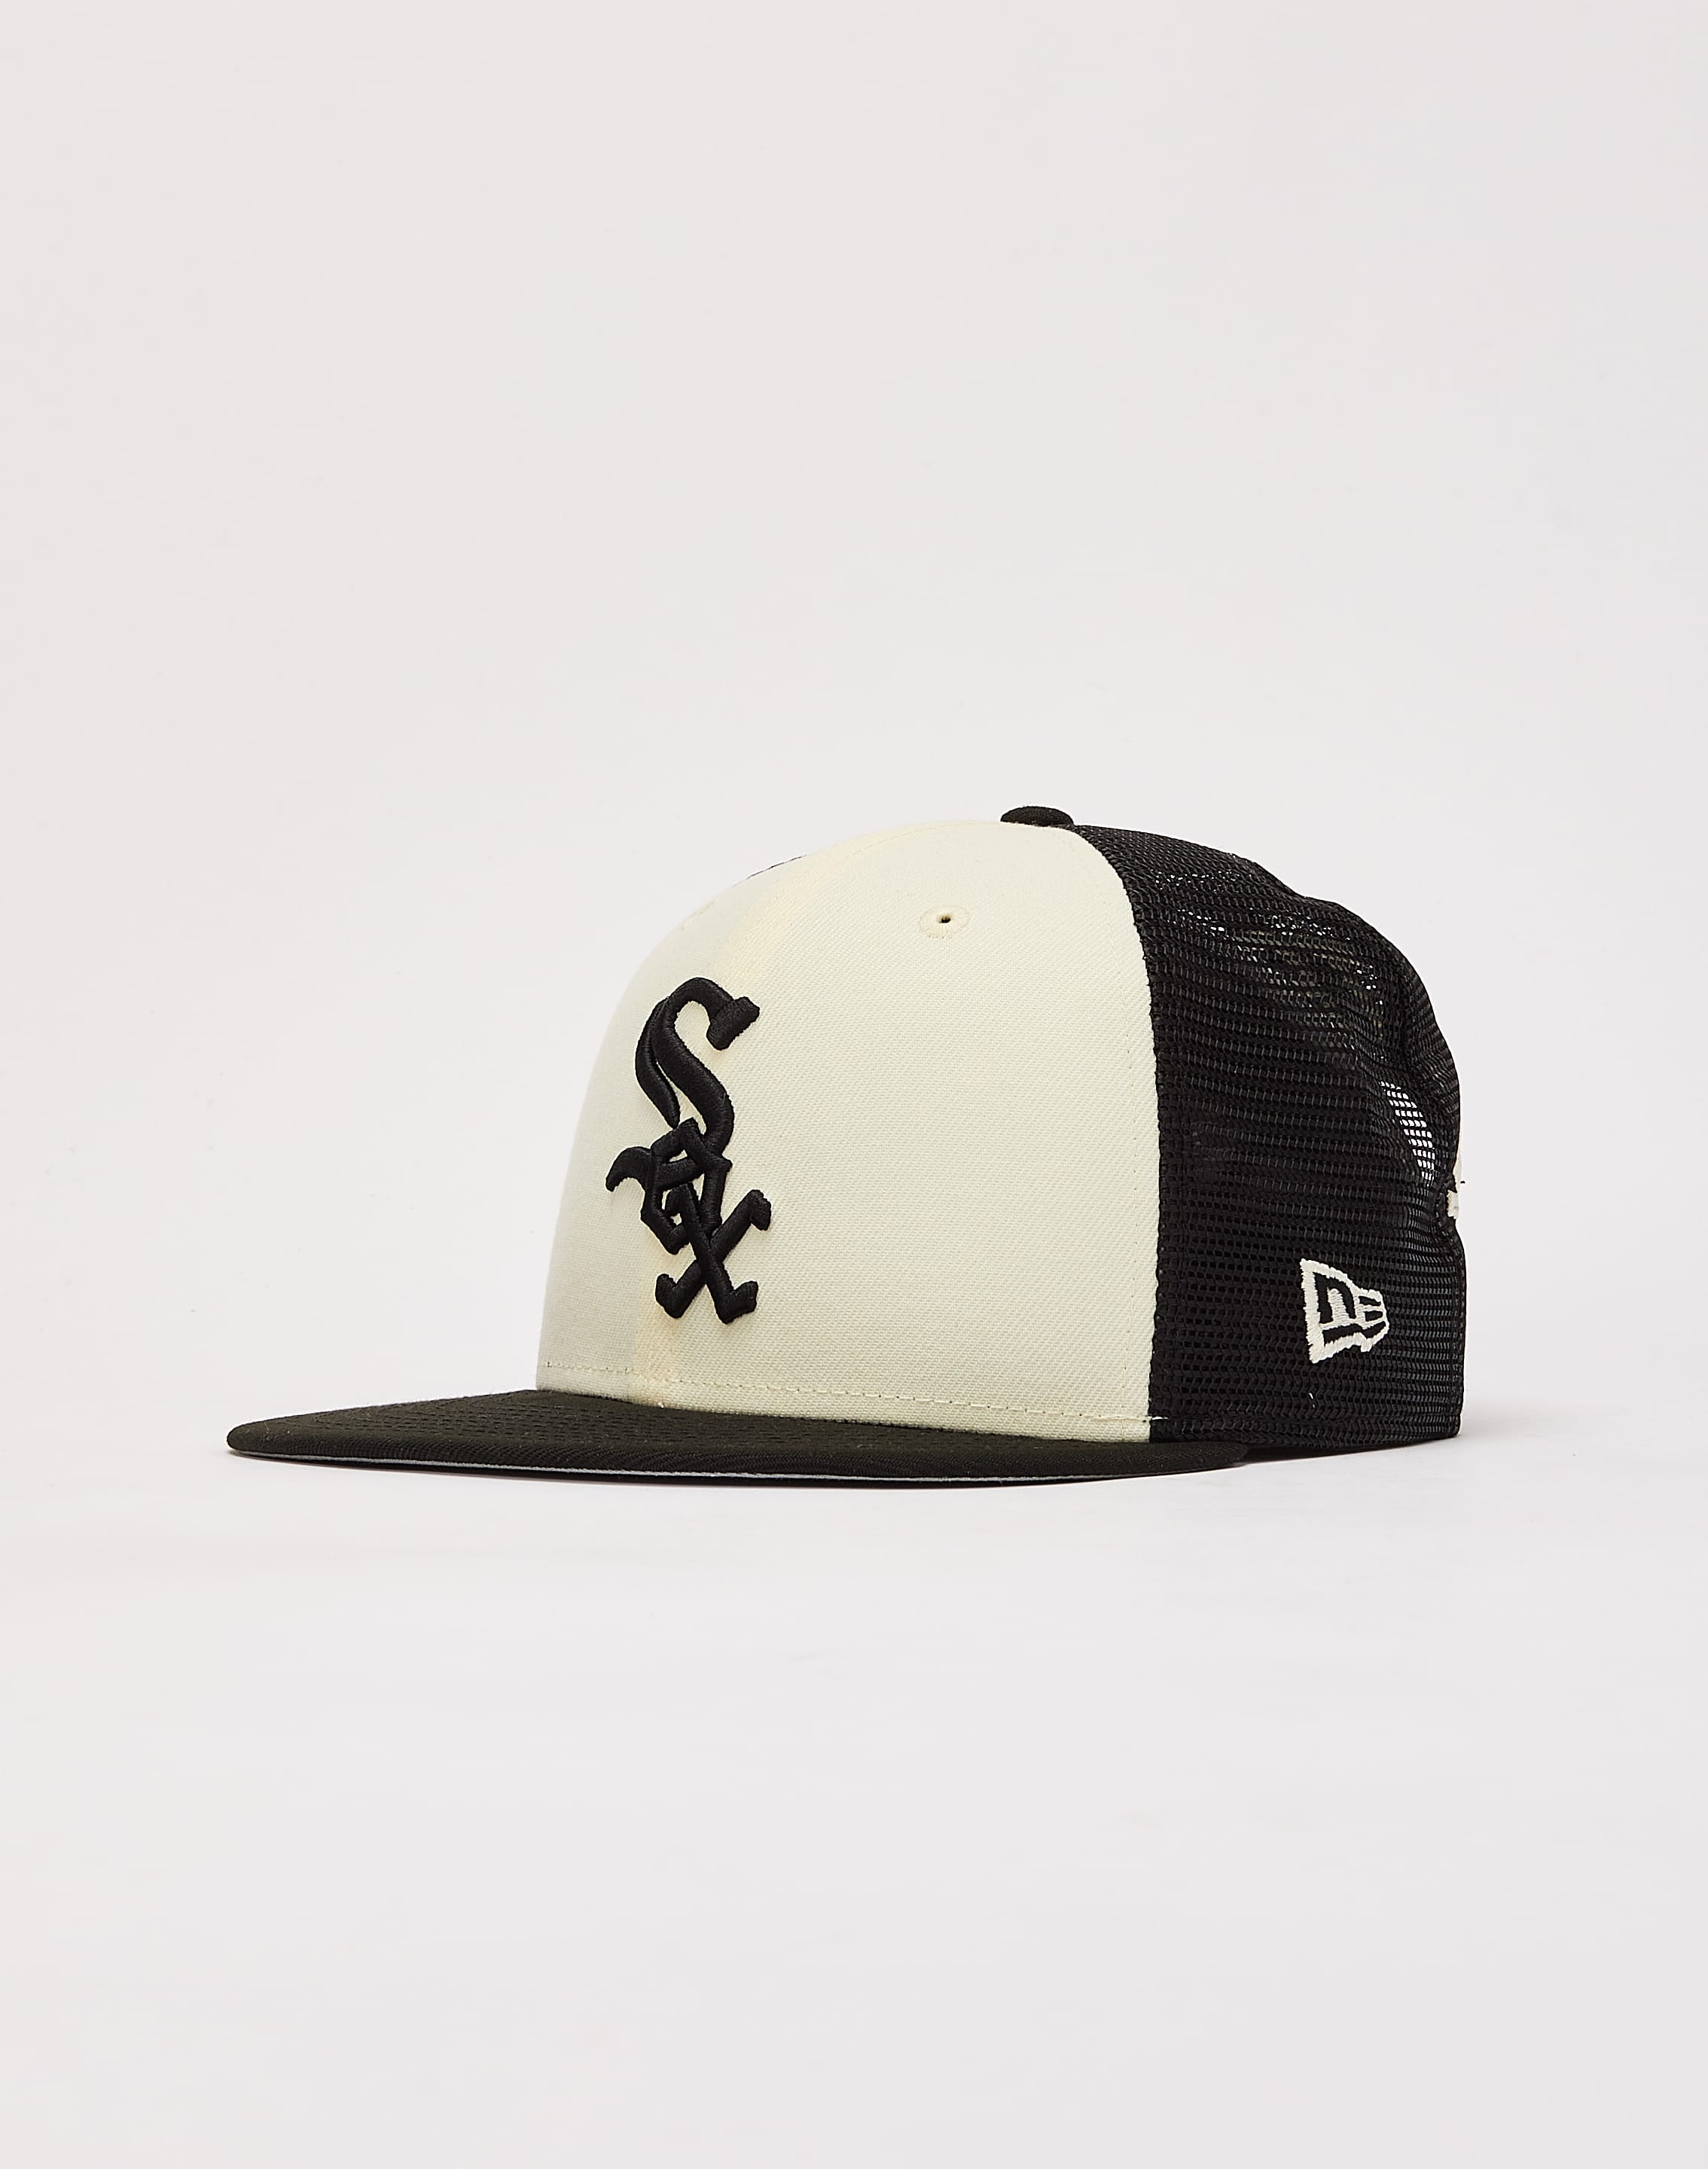 Chicago White Sox Hats in Chicago White Sox Team Shop 